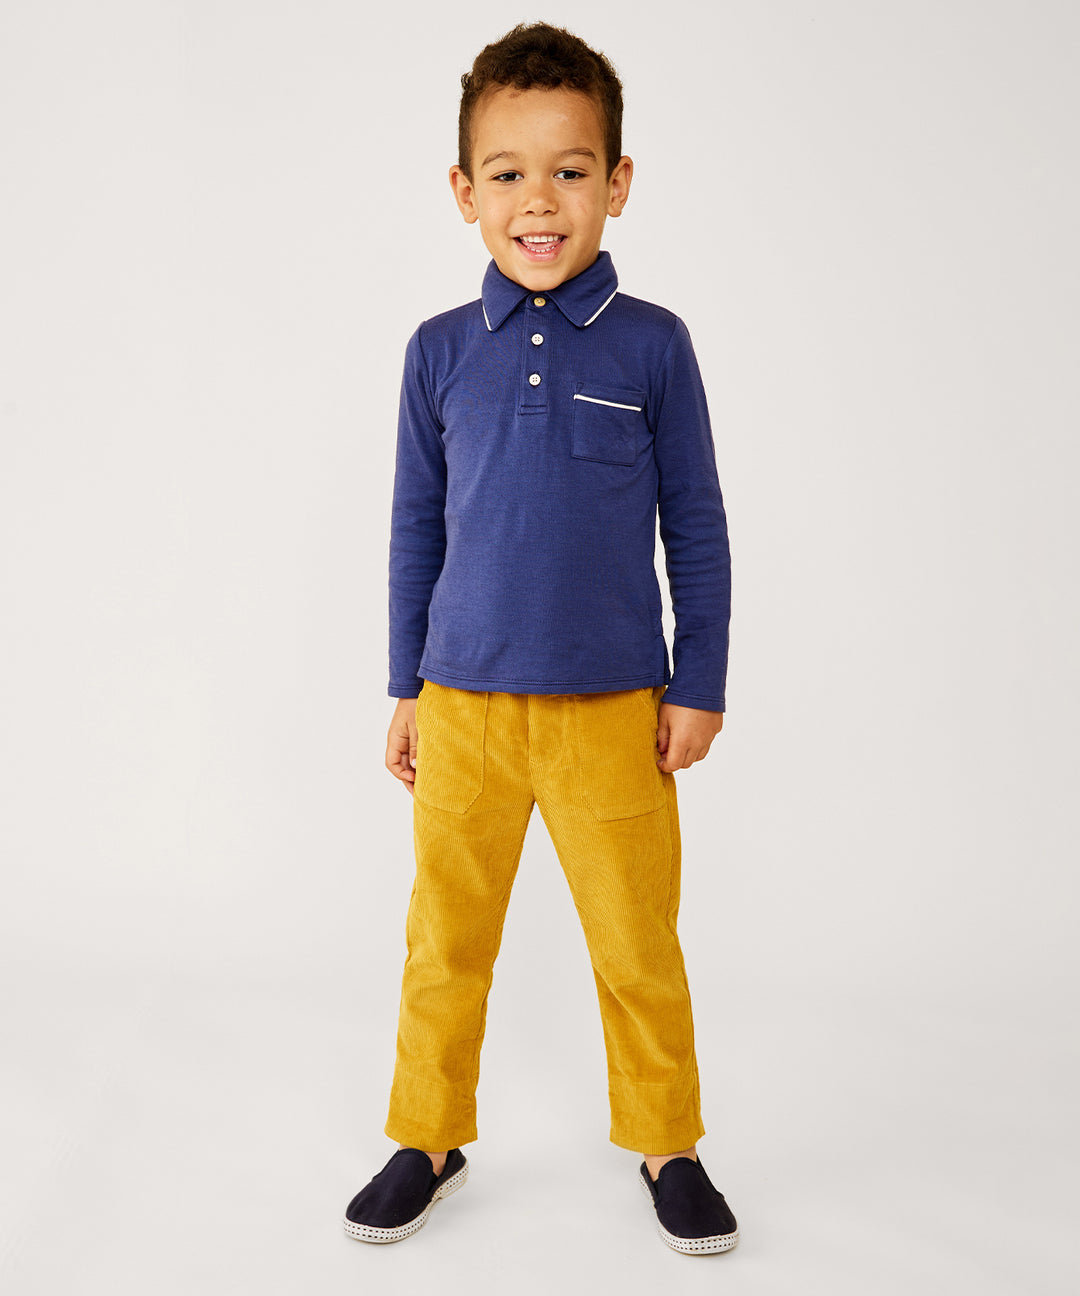 Grow Toddler, Boy's and Girl's Pants In Mustard | Oso & Me